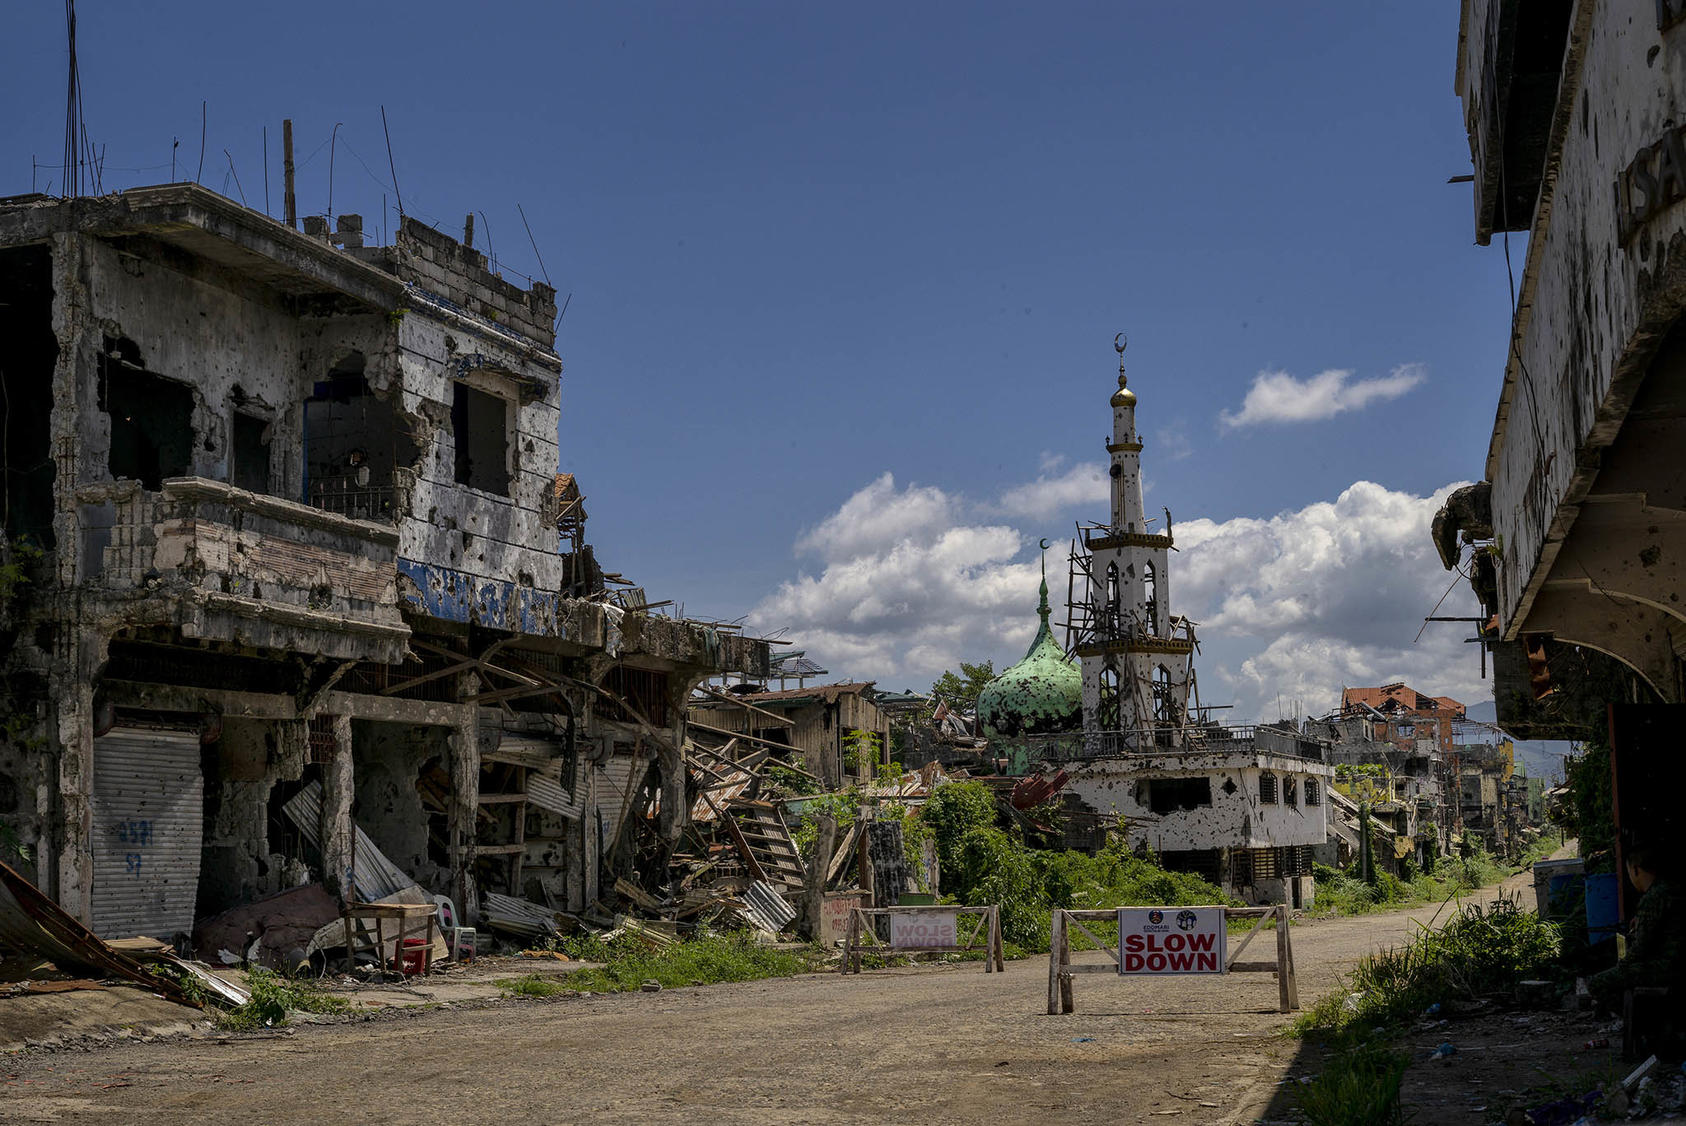 War-damaged structures that were part of the city’s area of conflict with the Islamic State group, in Marawi City, the Philippines, April 13, 2019. (Jes Aznar/The New York Times)